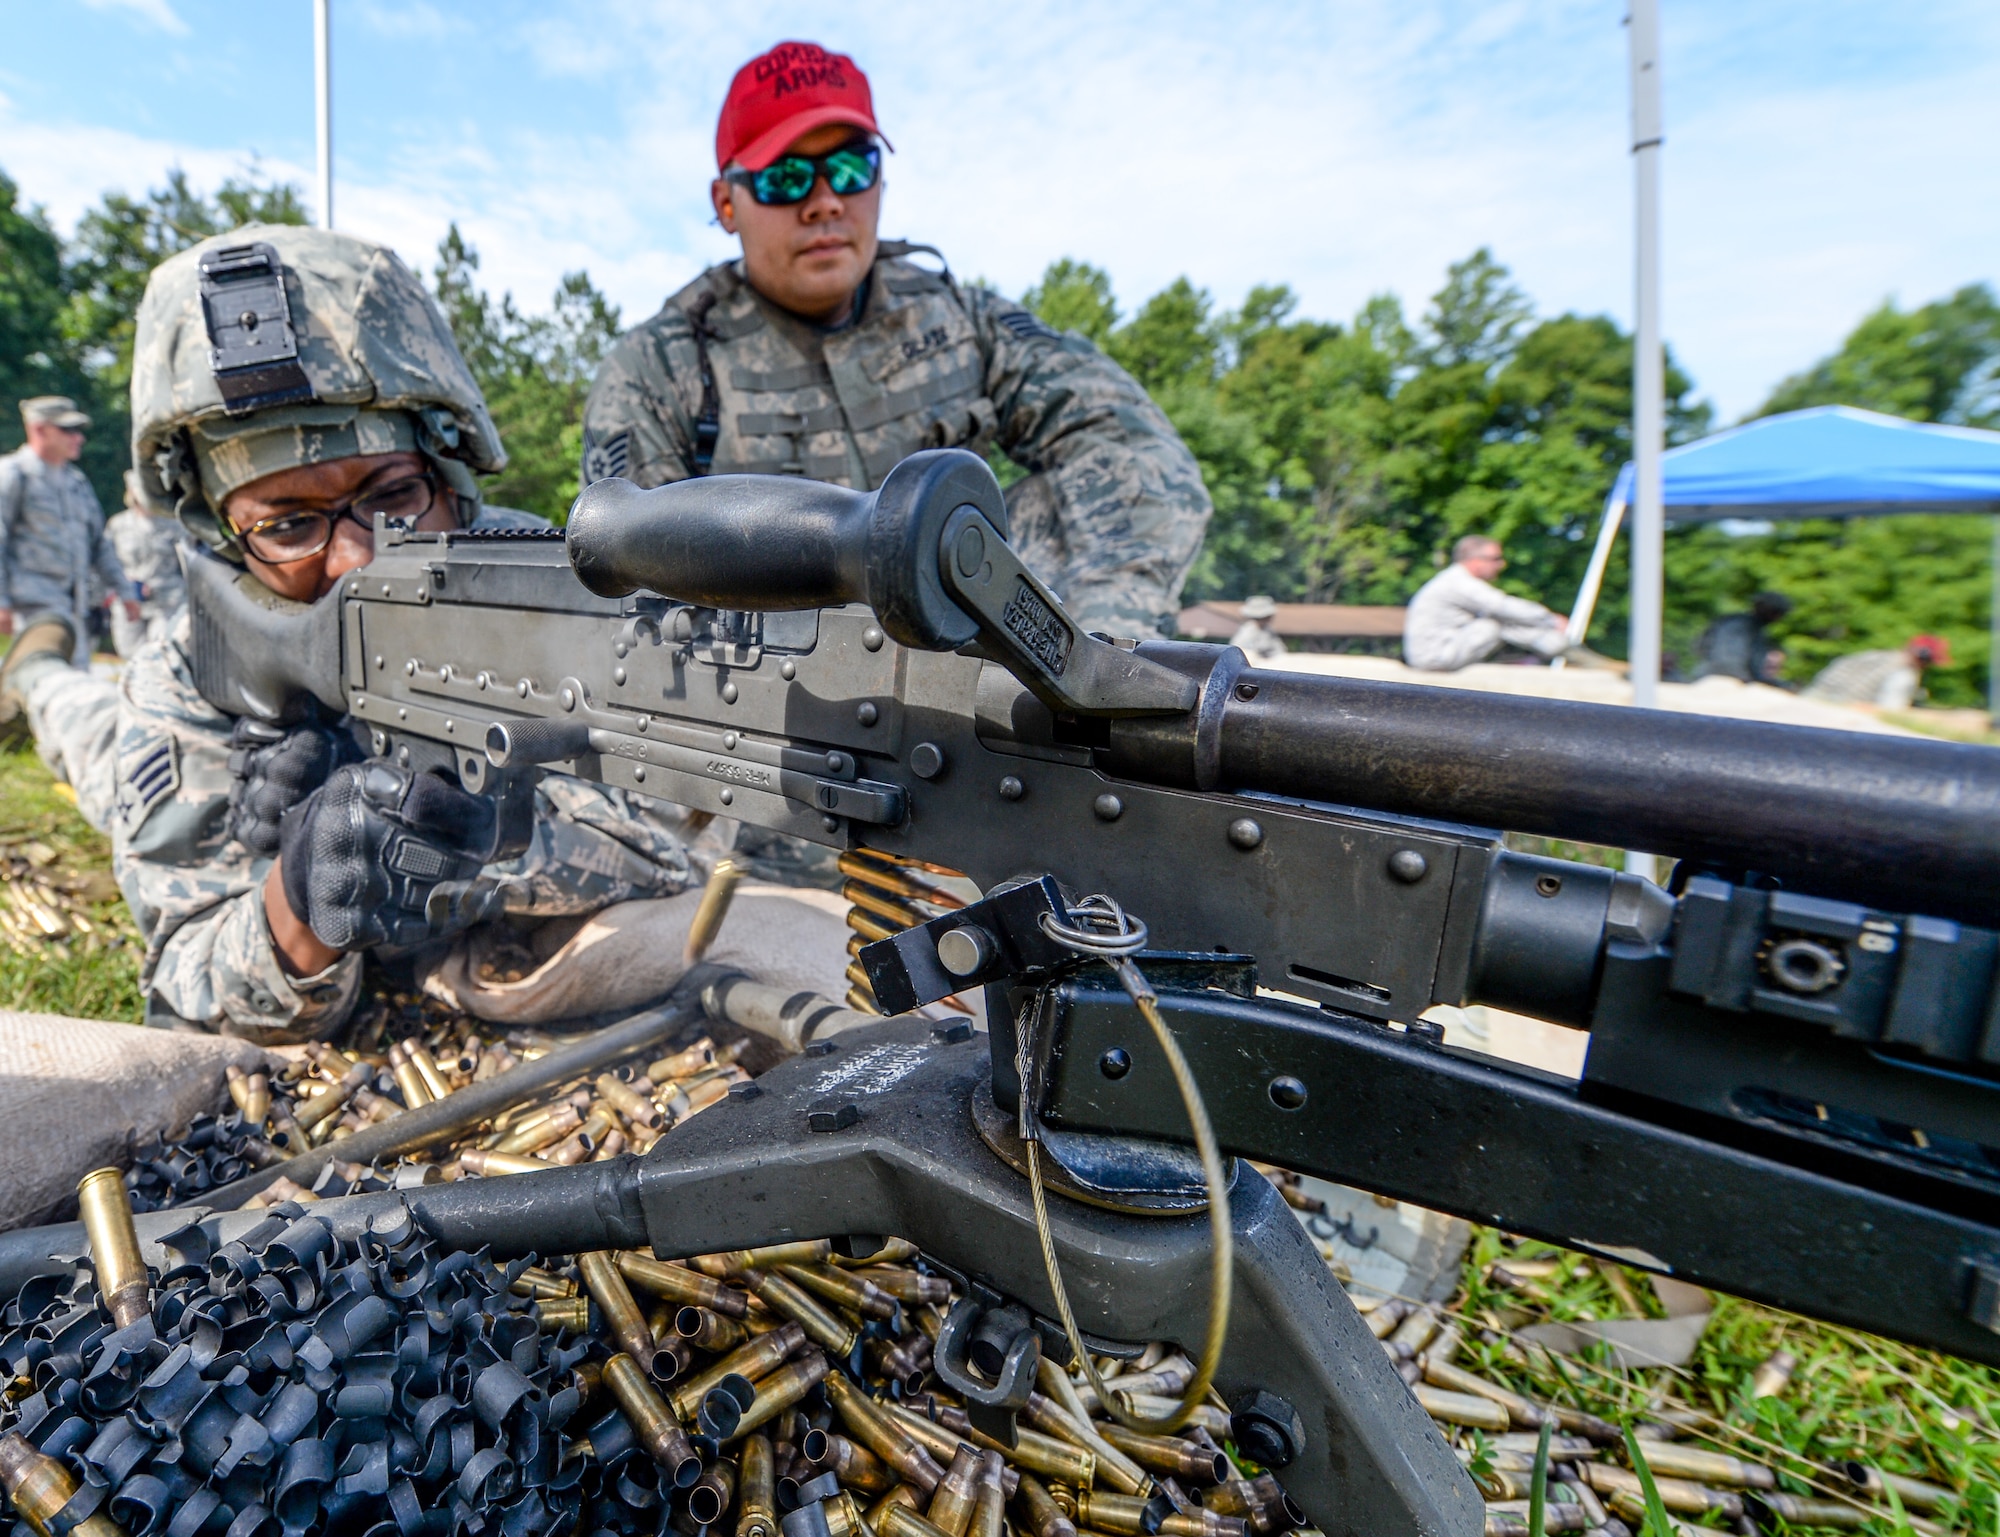 U.S. Air Force Senior Airman Quataisia Marigny, a member of the 116th Security Forces Squadron (SFS), Georgia Air National Guard, fires an M240 machine gun under the watchful eye of Staff Sgt. Alan Glaze, a combat arms instructor from the 116th SFS, during a training exercise at the Catoosa Training Site, Tunnel Hill, Ga., June 26, 2014. The 116th SFS is the security arm of the 116th Air Control Wing based at Robins Air Force Base, Ga. The squadron deployed to the Catoosa Training Site for annual training where they received extensive classroom and hands-on training to hone their skills on various firearms such as the M4 carbine, M203 grenade launcher and M240 and M249 machine guns. (U.S. Air National Guard photo by Master Sgt. Roger Parsons/Released)